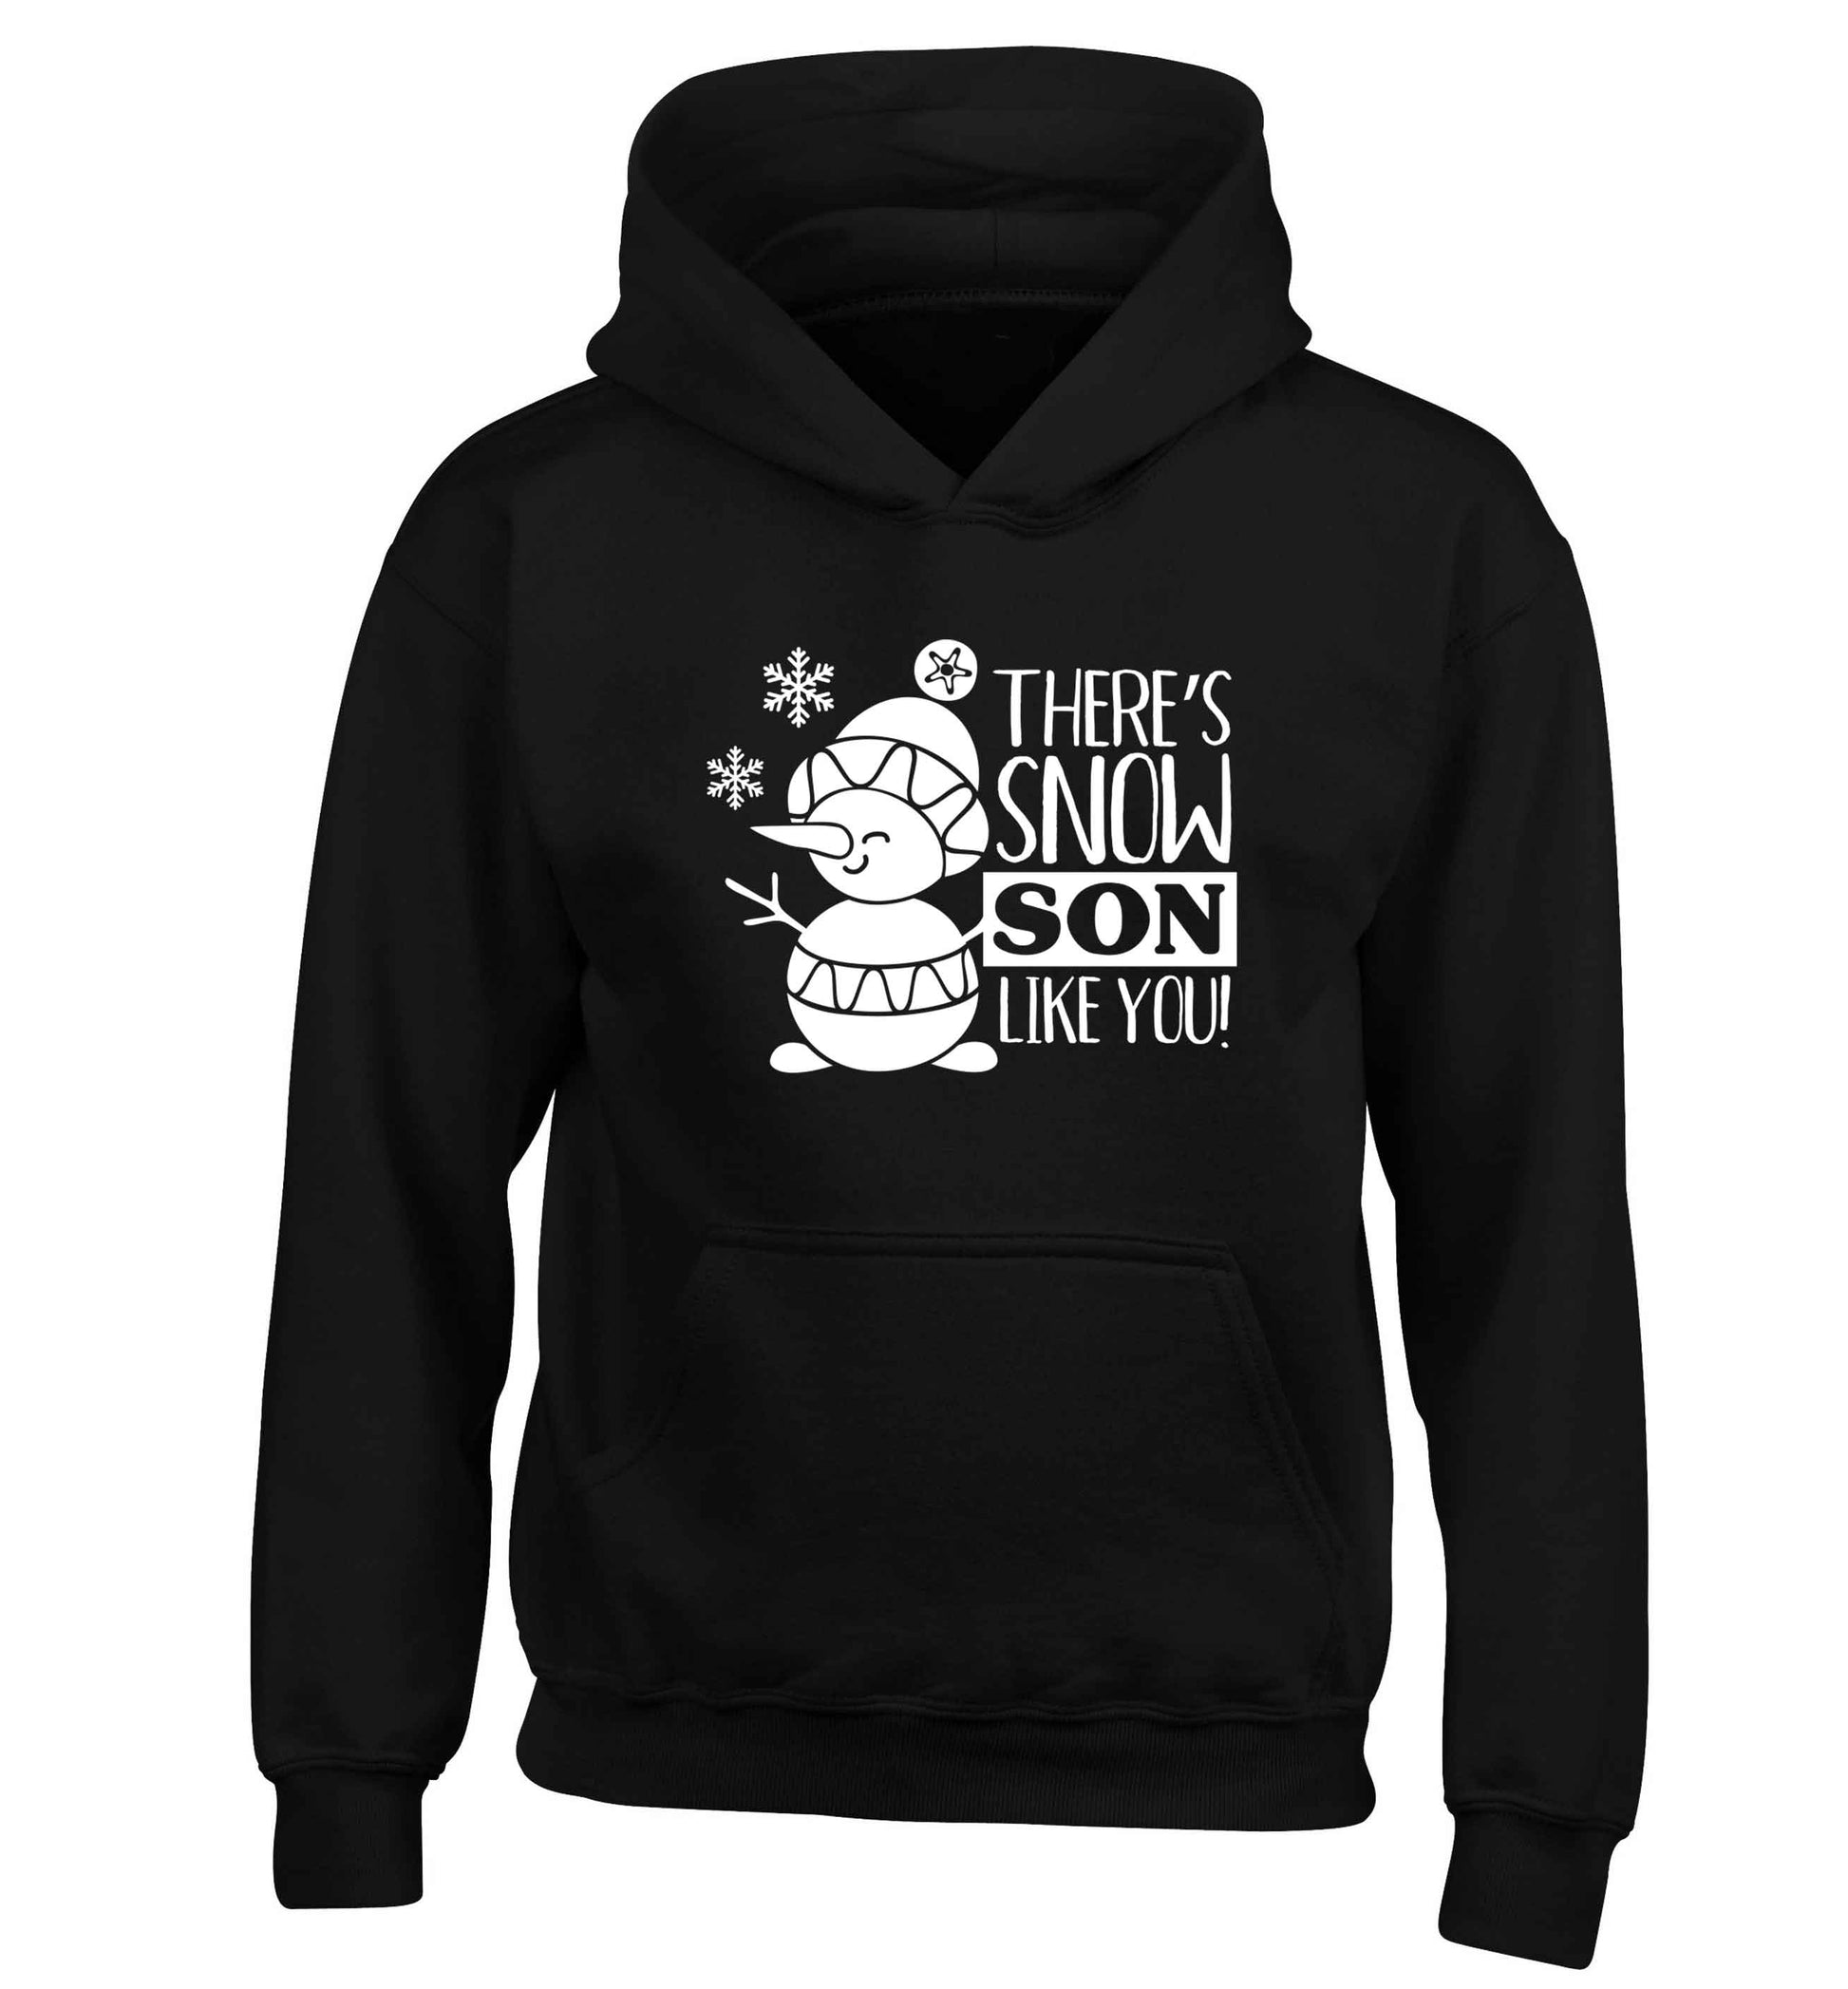 There's snow son like you children's black hoodie 12-13 Years